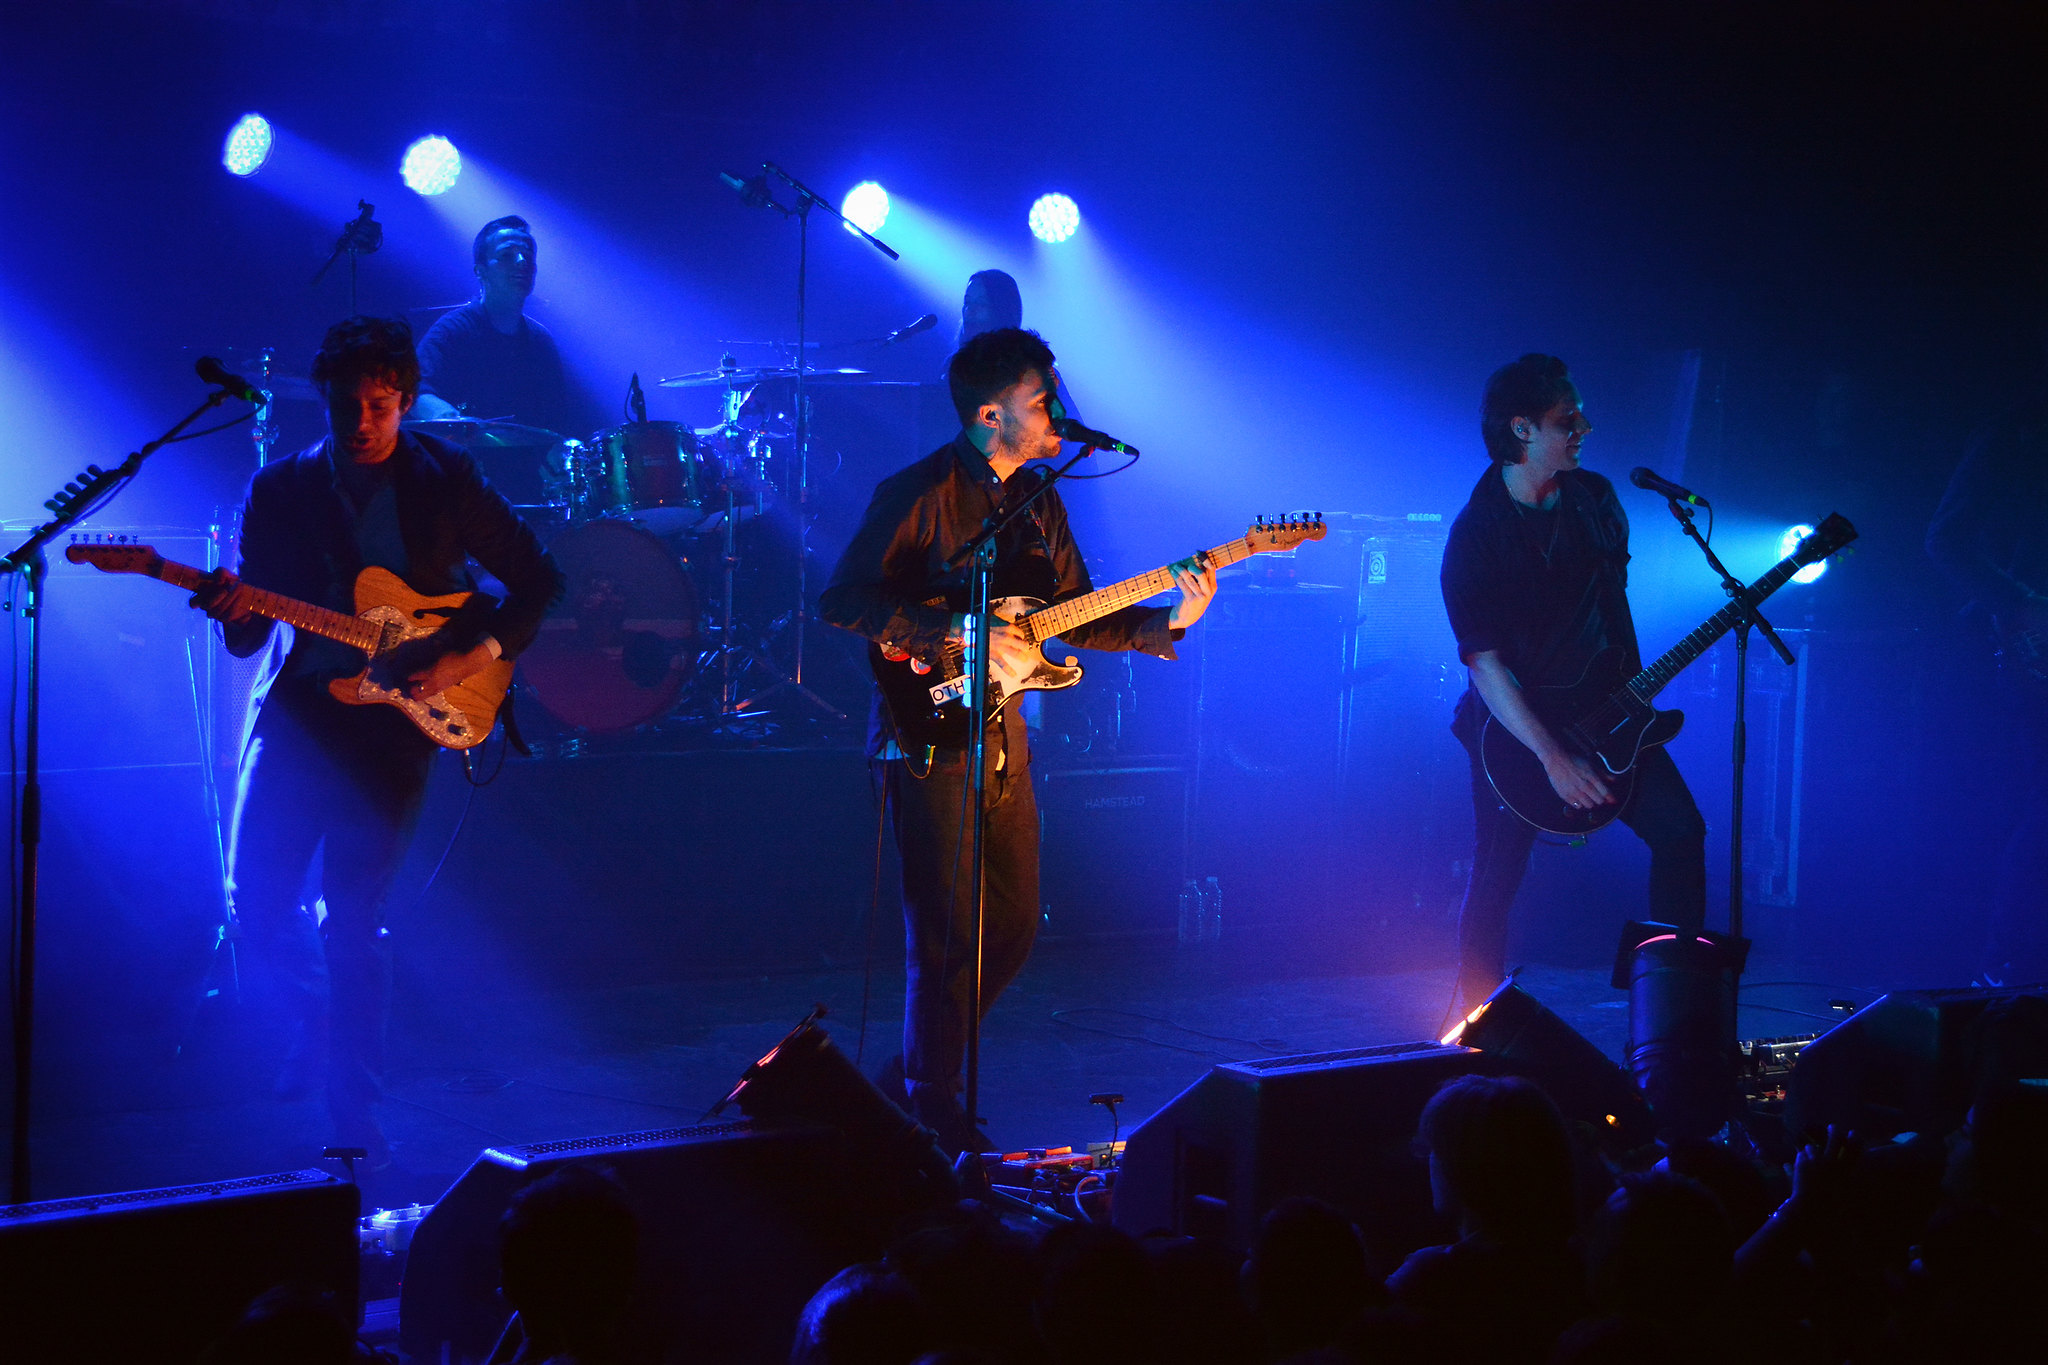 THE MACCABEES